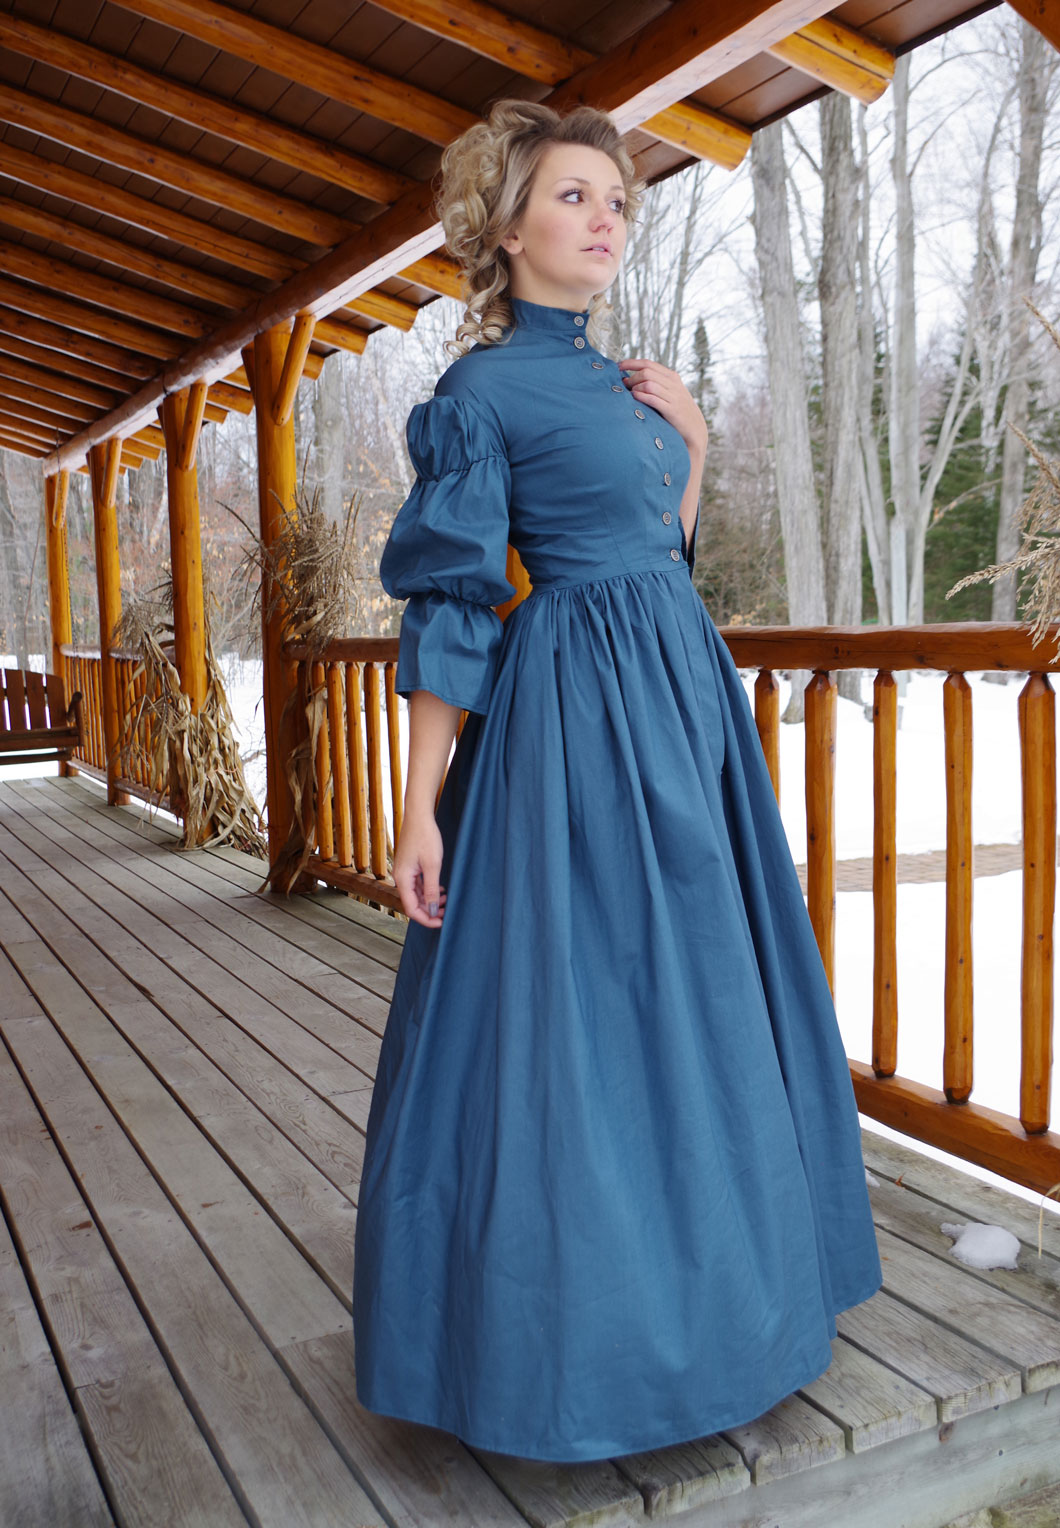 Pioneer Dresses from Recollections (Page 2 of 2)